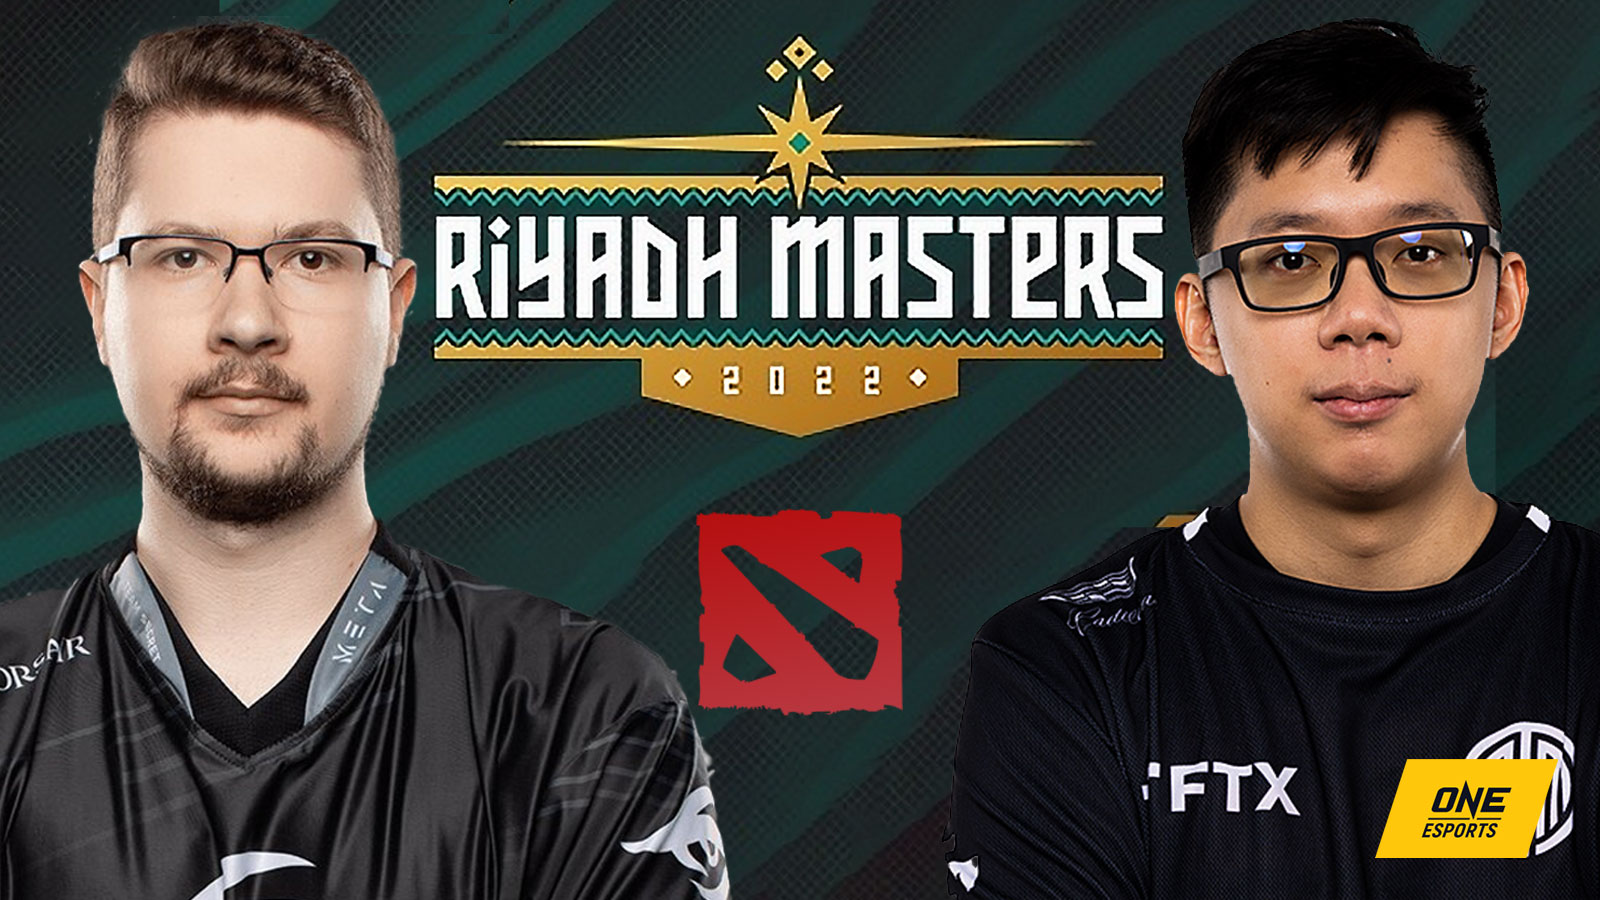 Riyadh Masters Dota 2 schedule and results ONE Esports